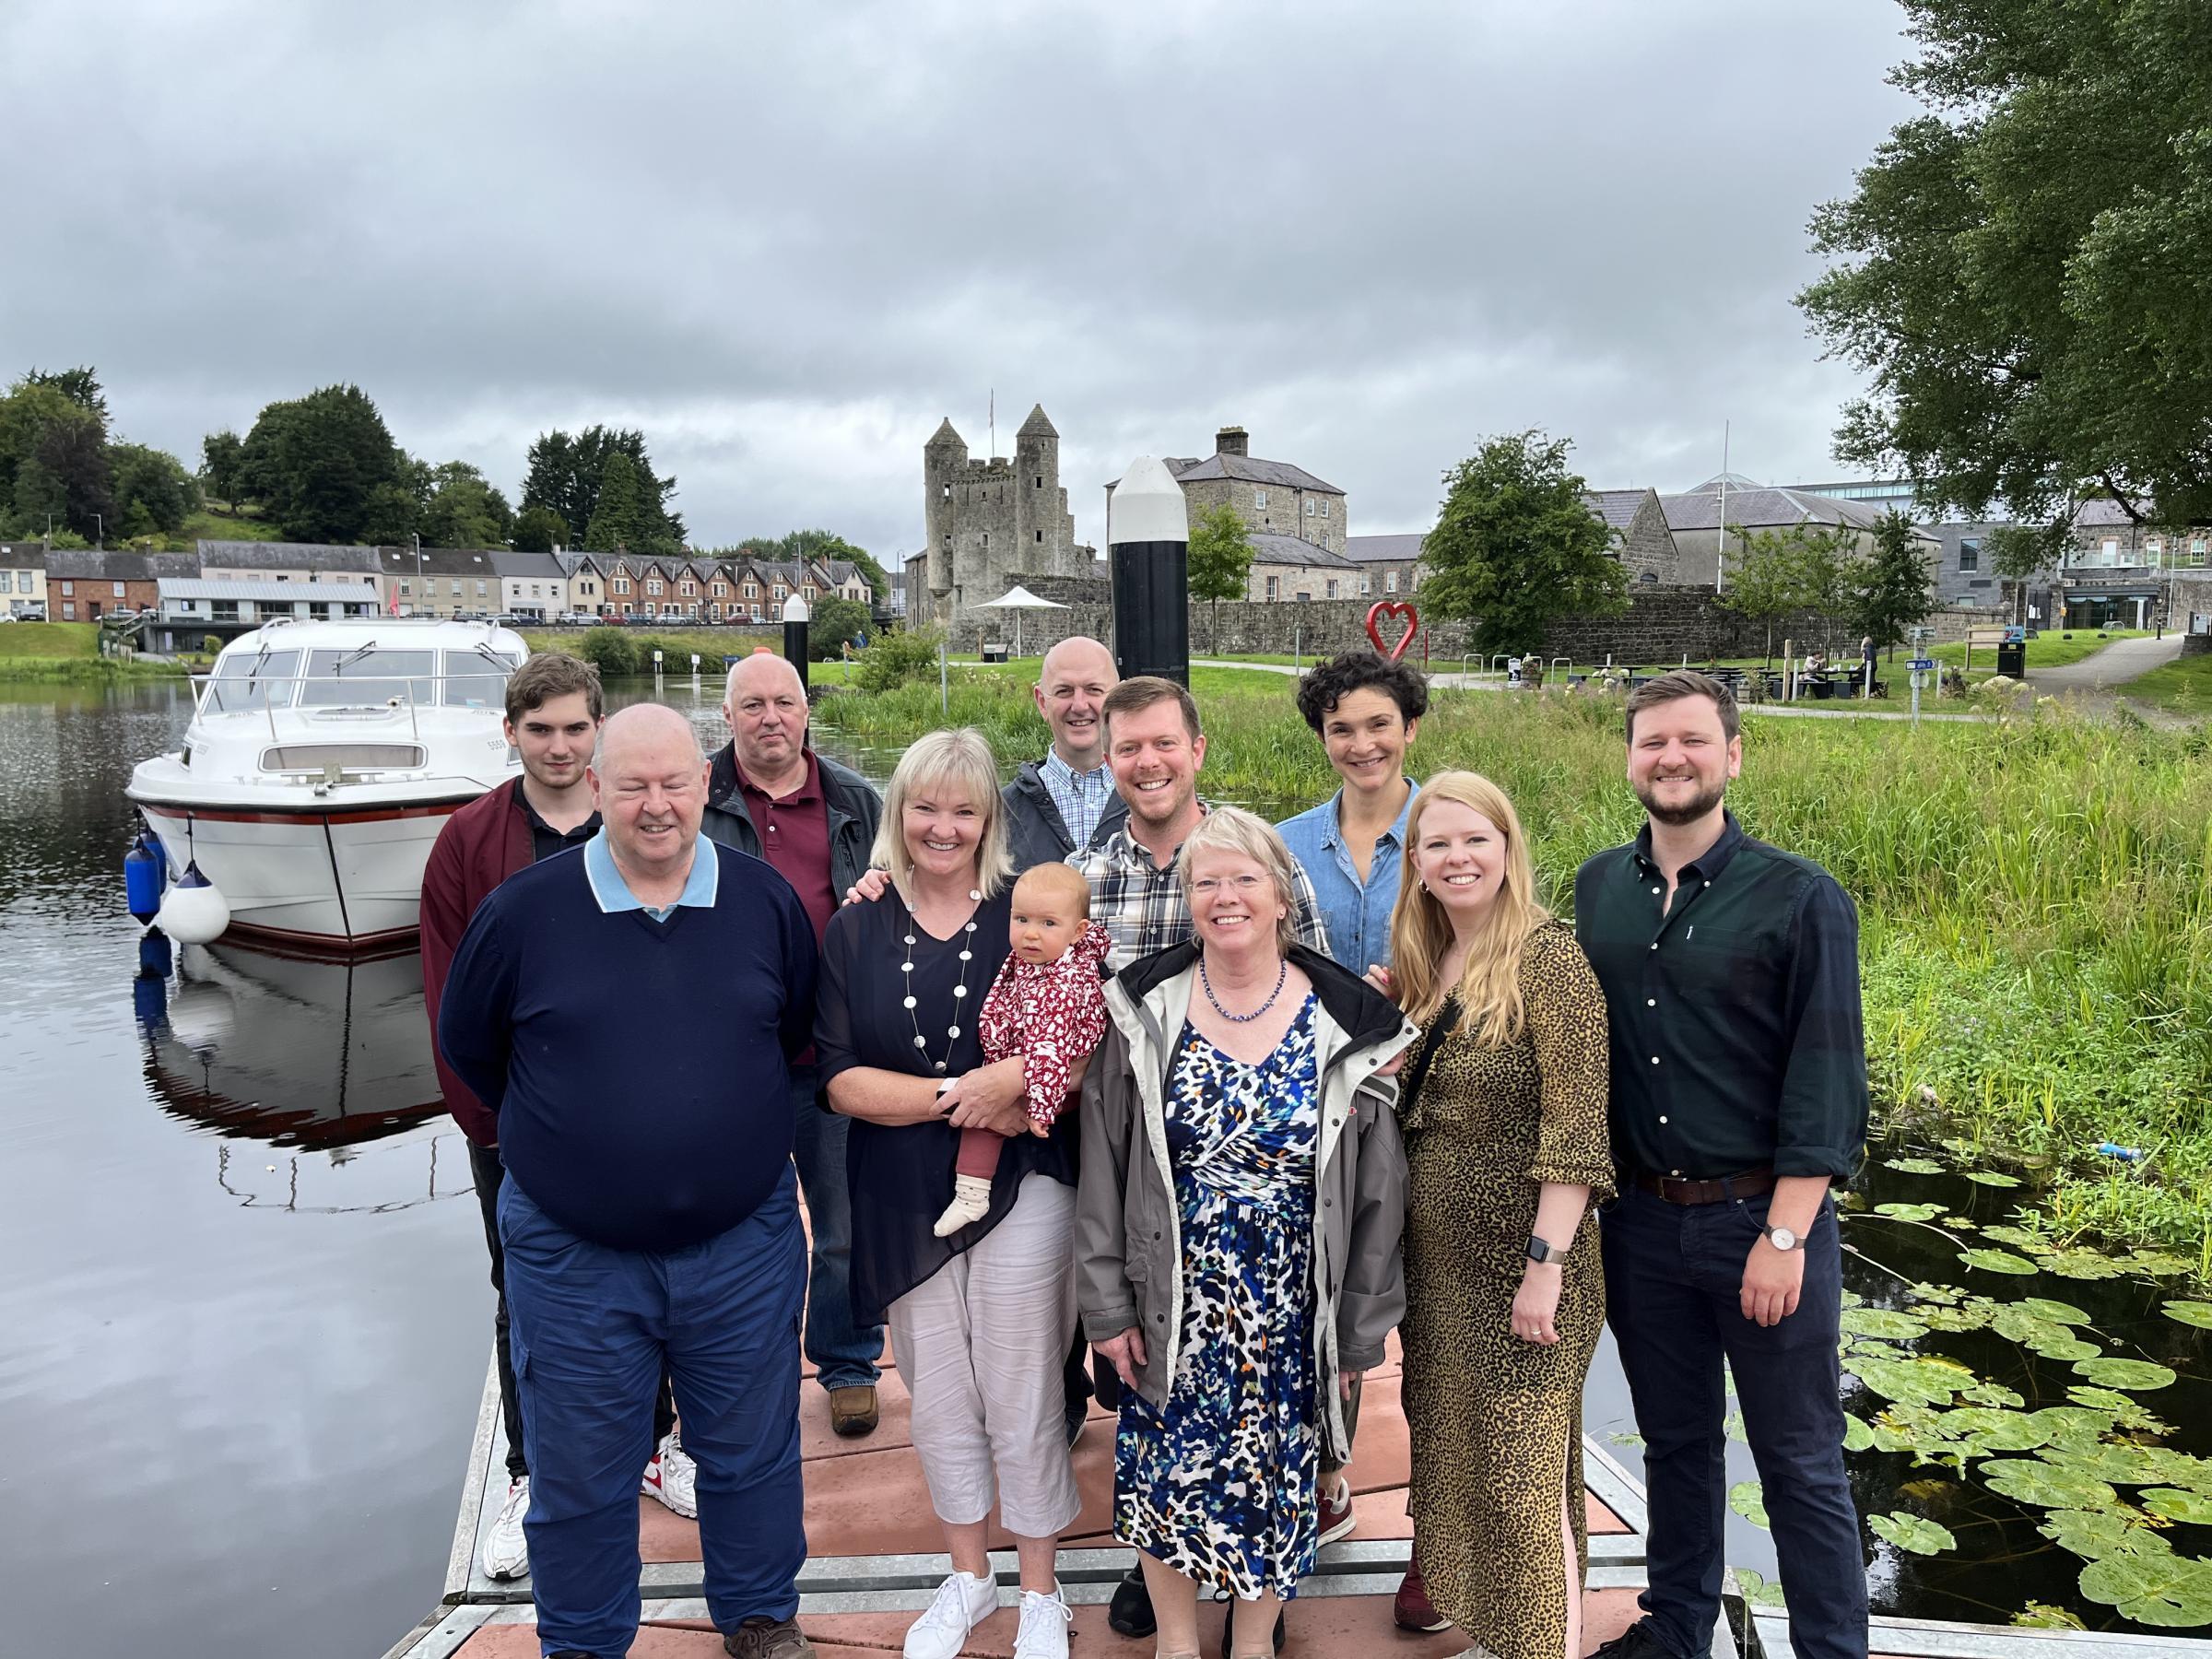 Family come to Fermanagh to scatter parents’ ashes on Lough Erne